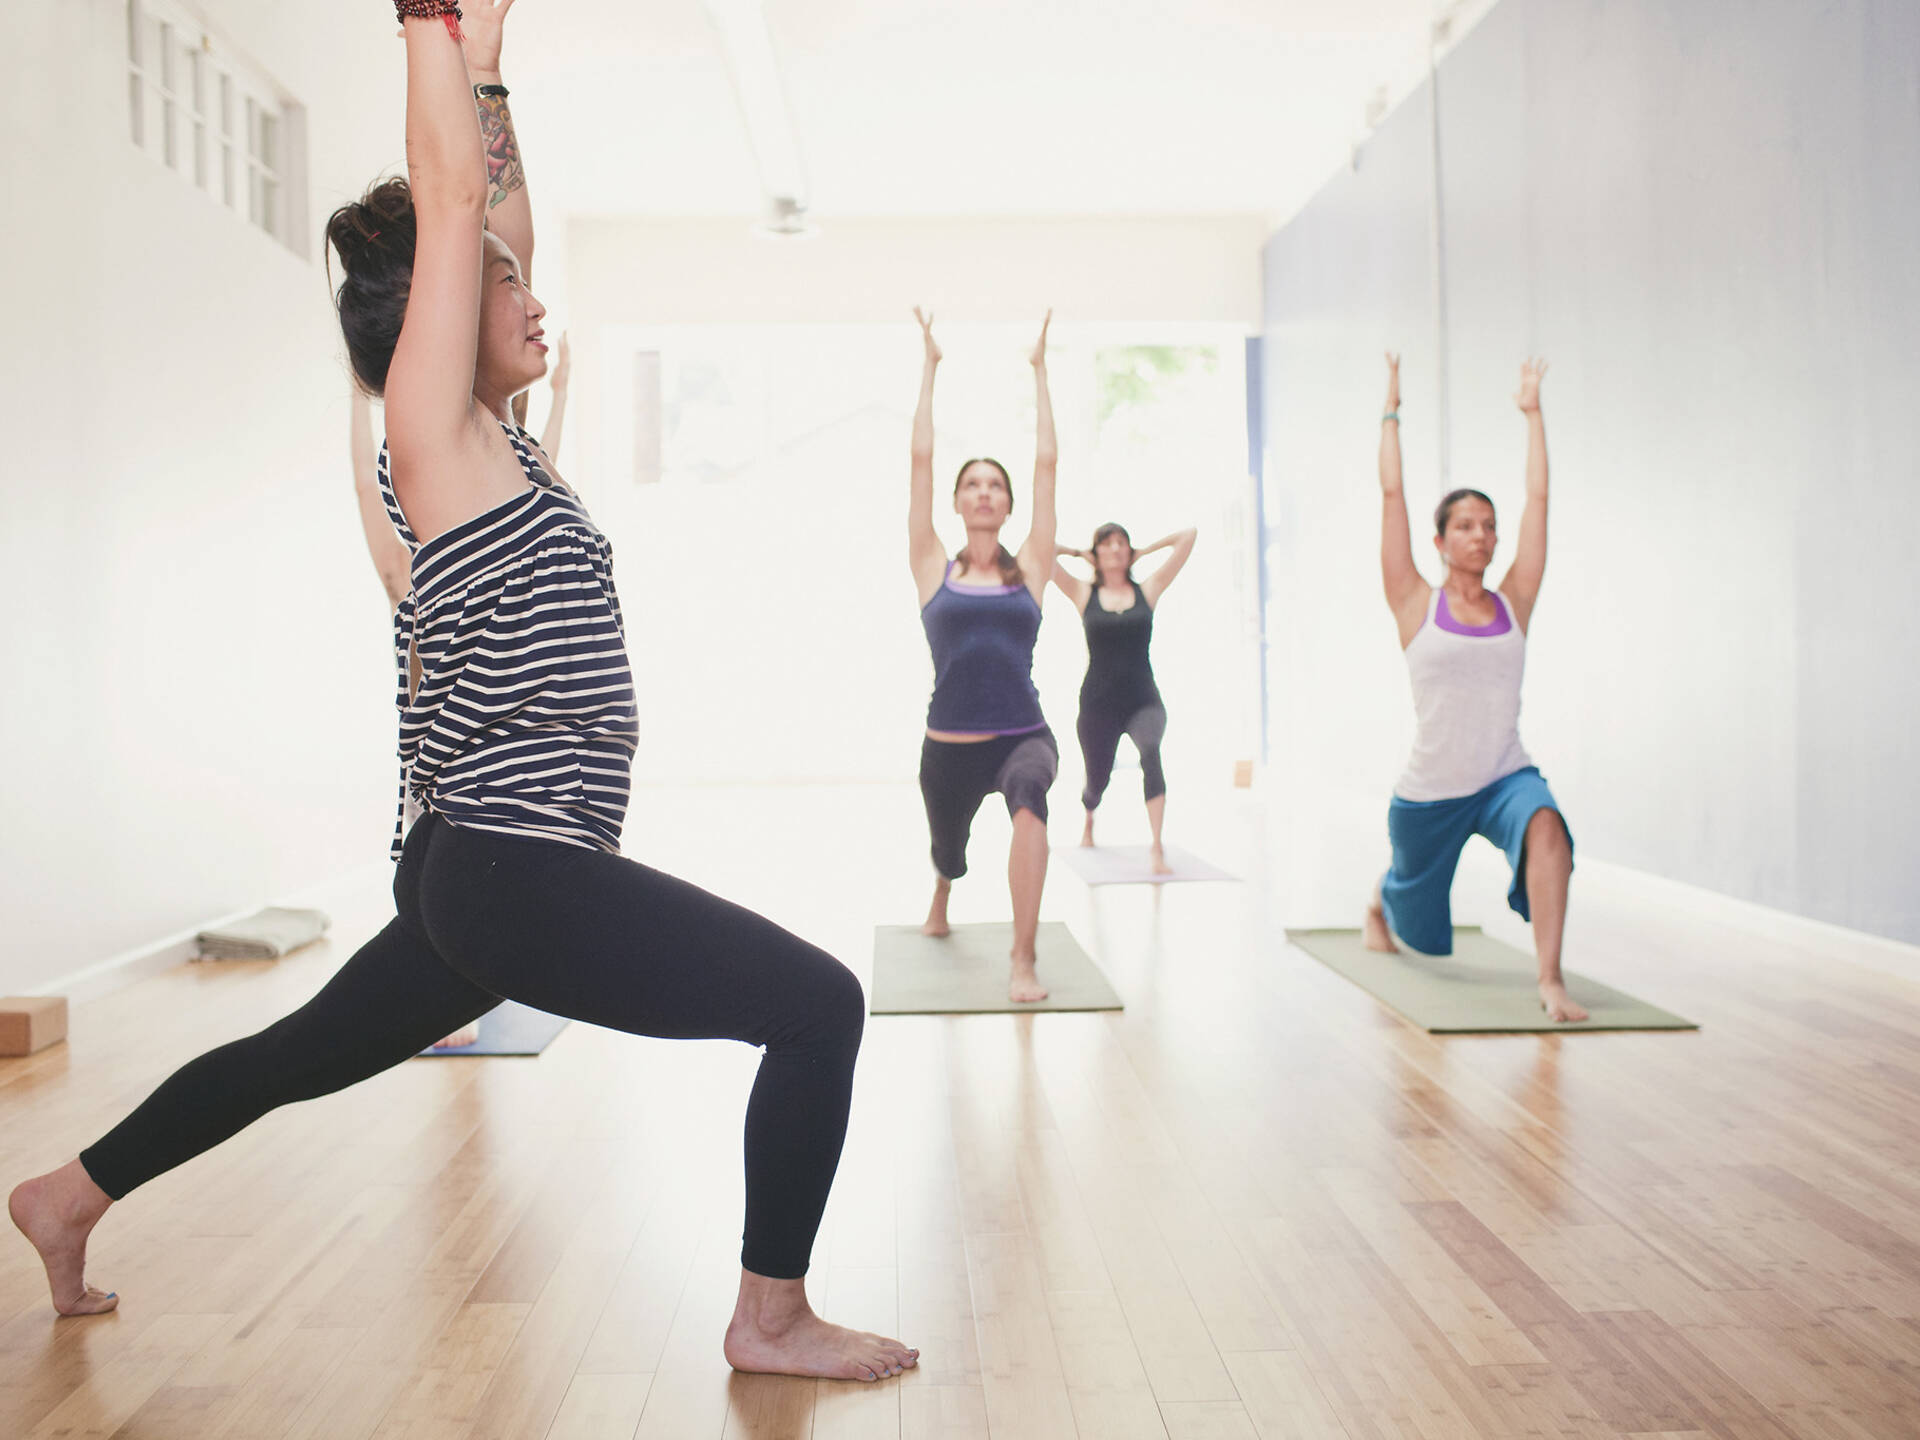 Free yoga, or by donation, classes throughout Los Angeles